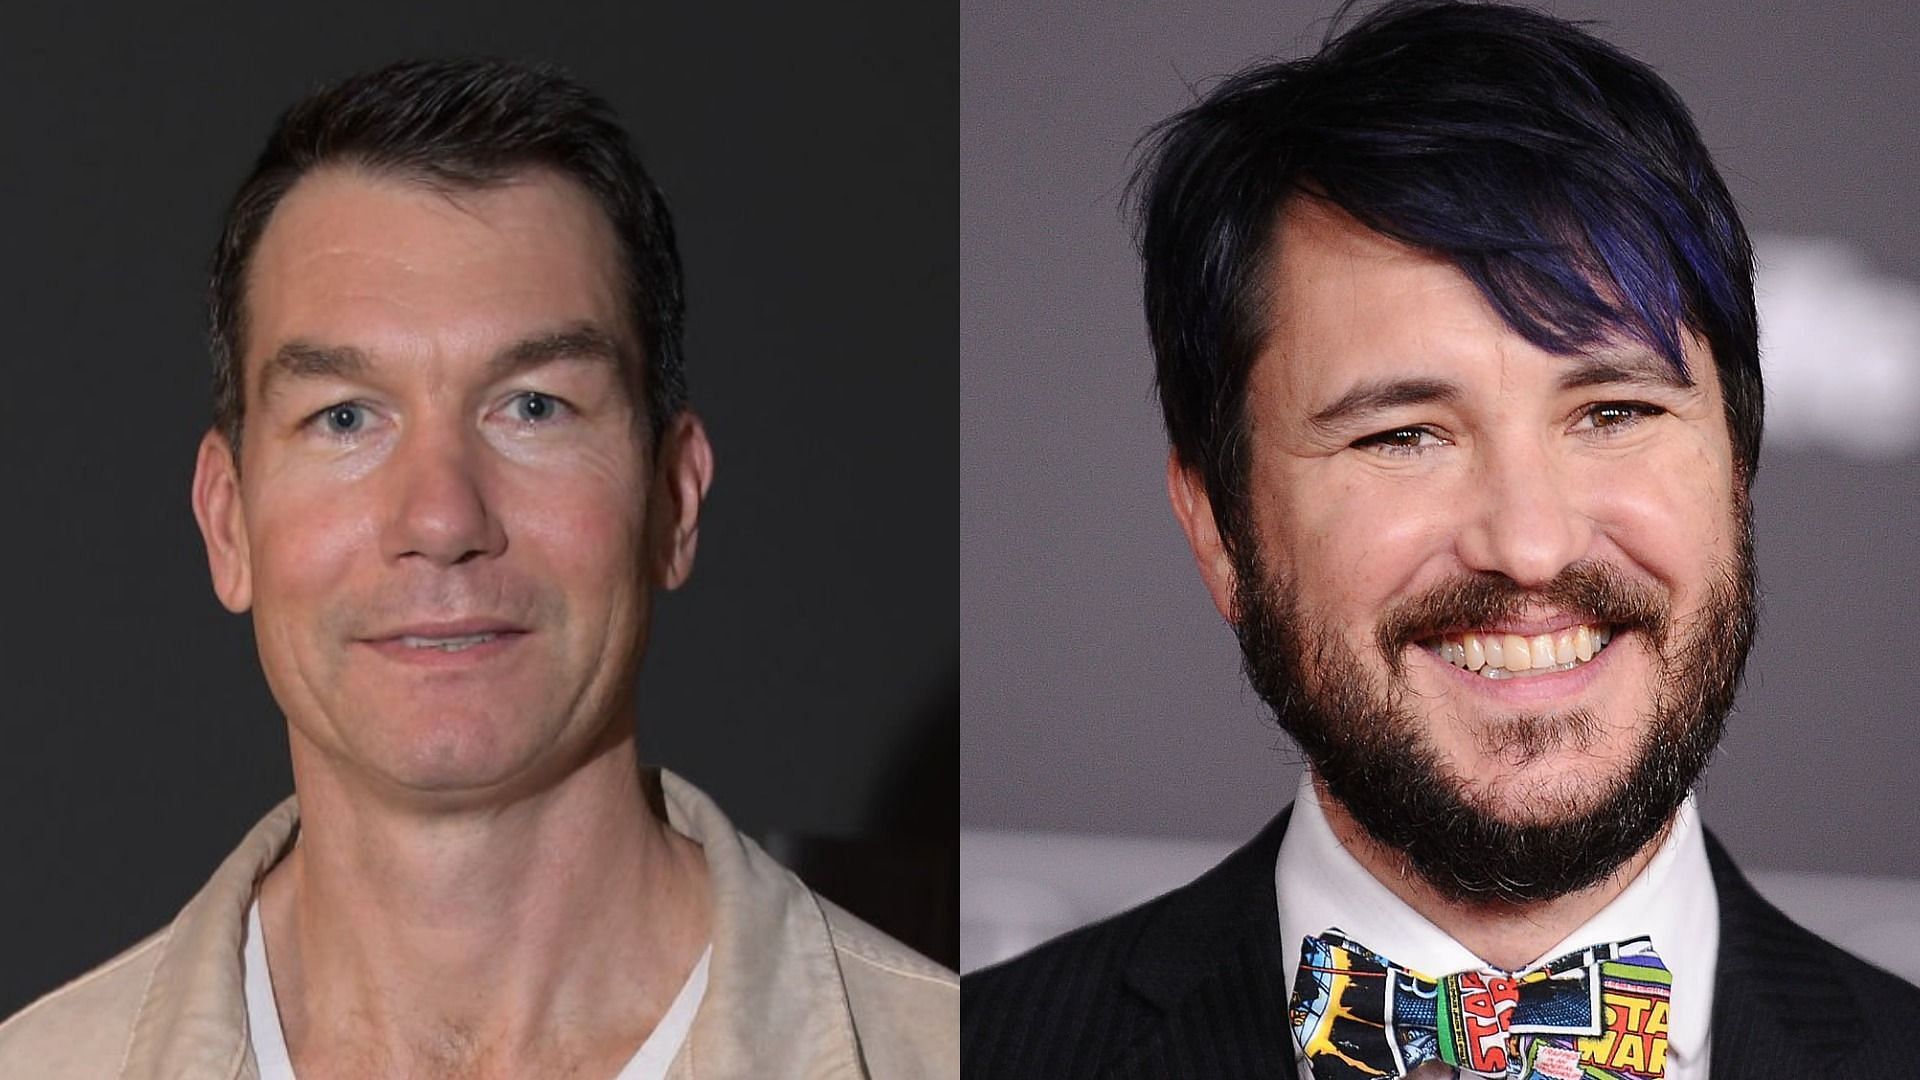 Jerry O&#039;Connell recently apologized to Stand By Me co-star Wil Wheaton for not being there for him during childhood abuse and trauma (Image via Michael Loccisano/Getty Images and Jason LaVeris/Getty Images)